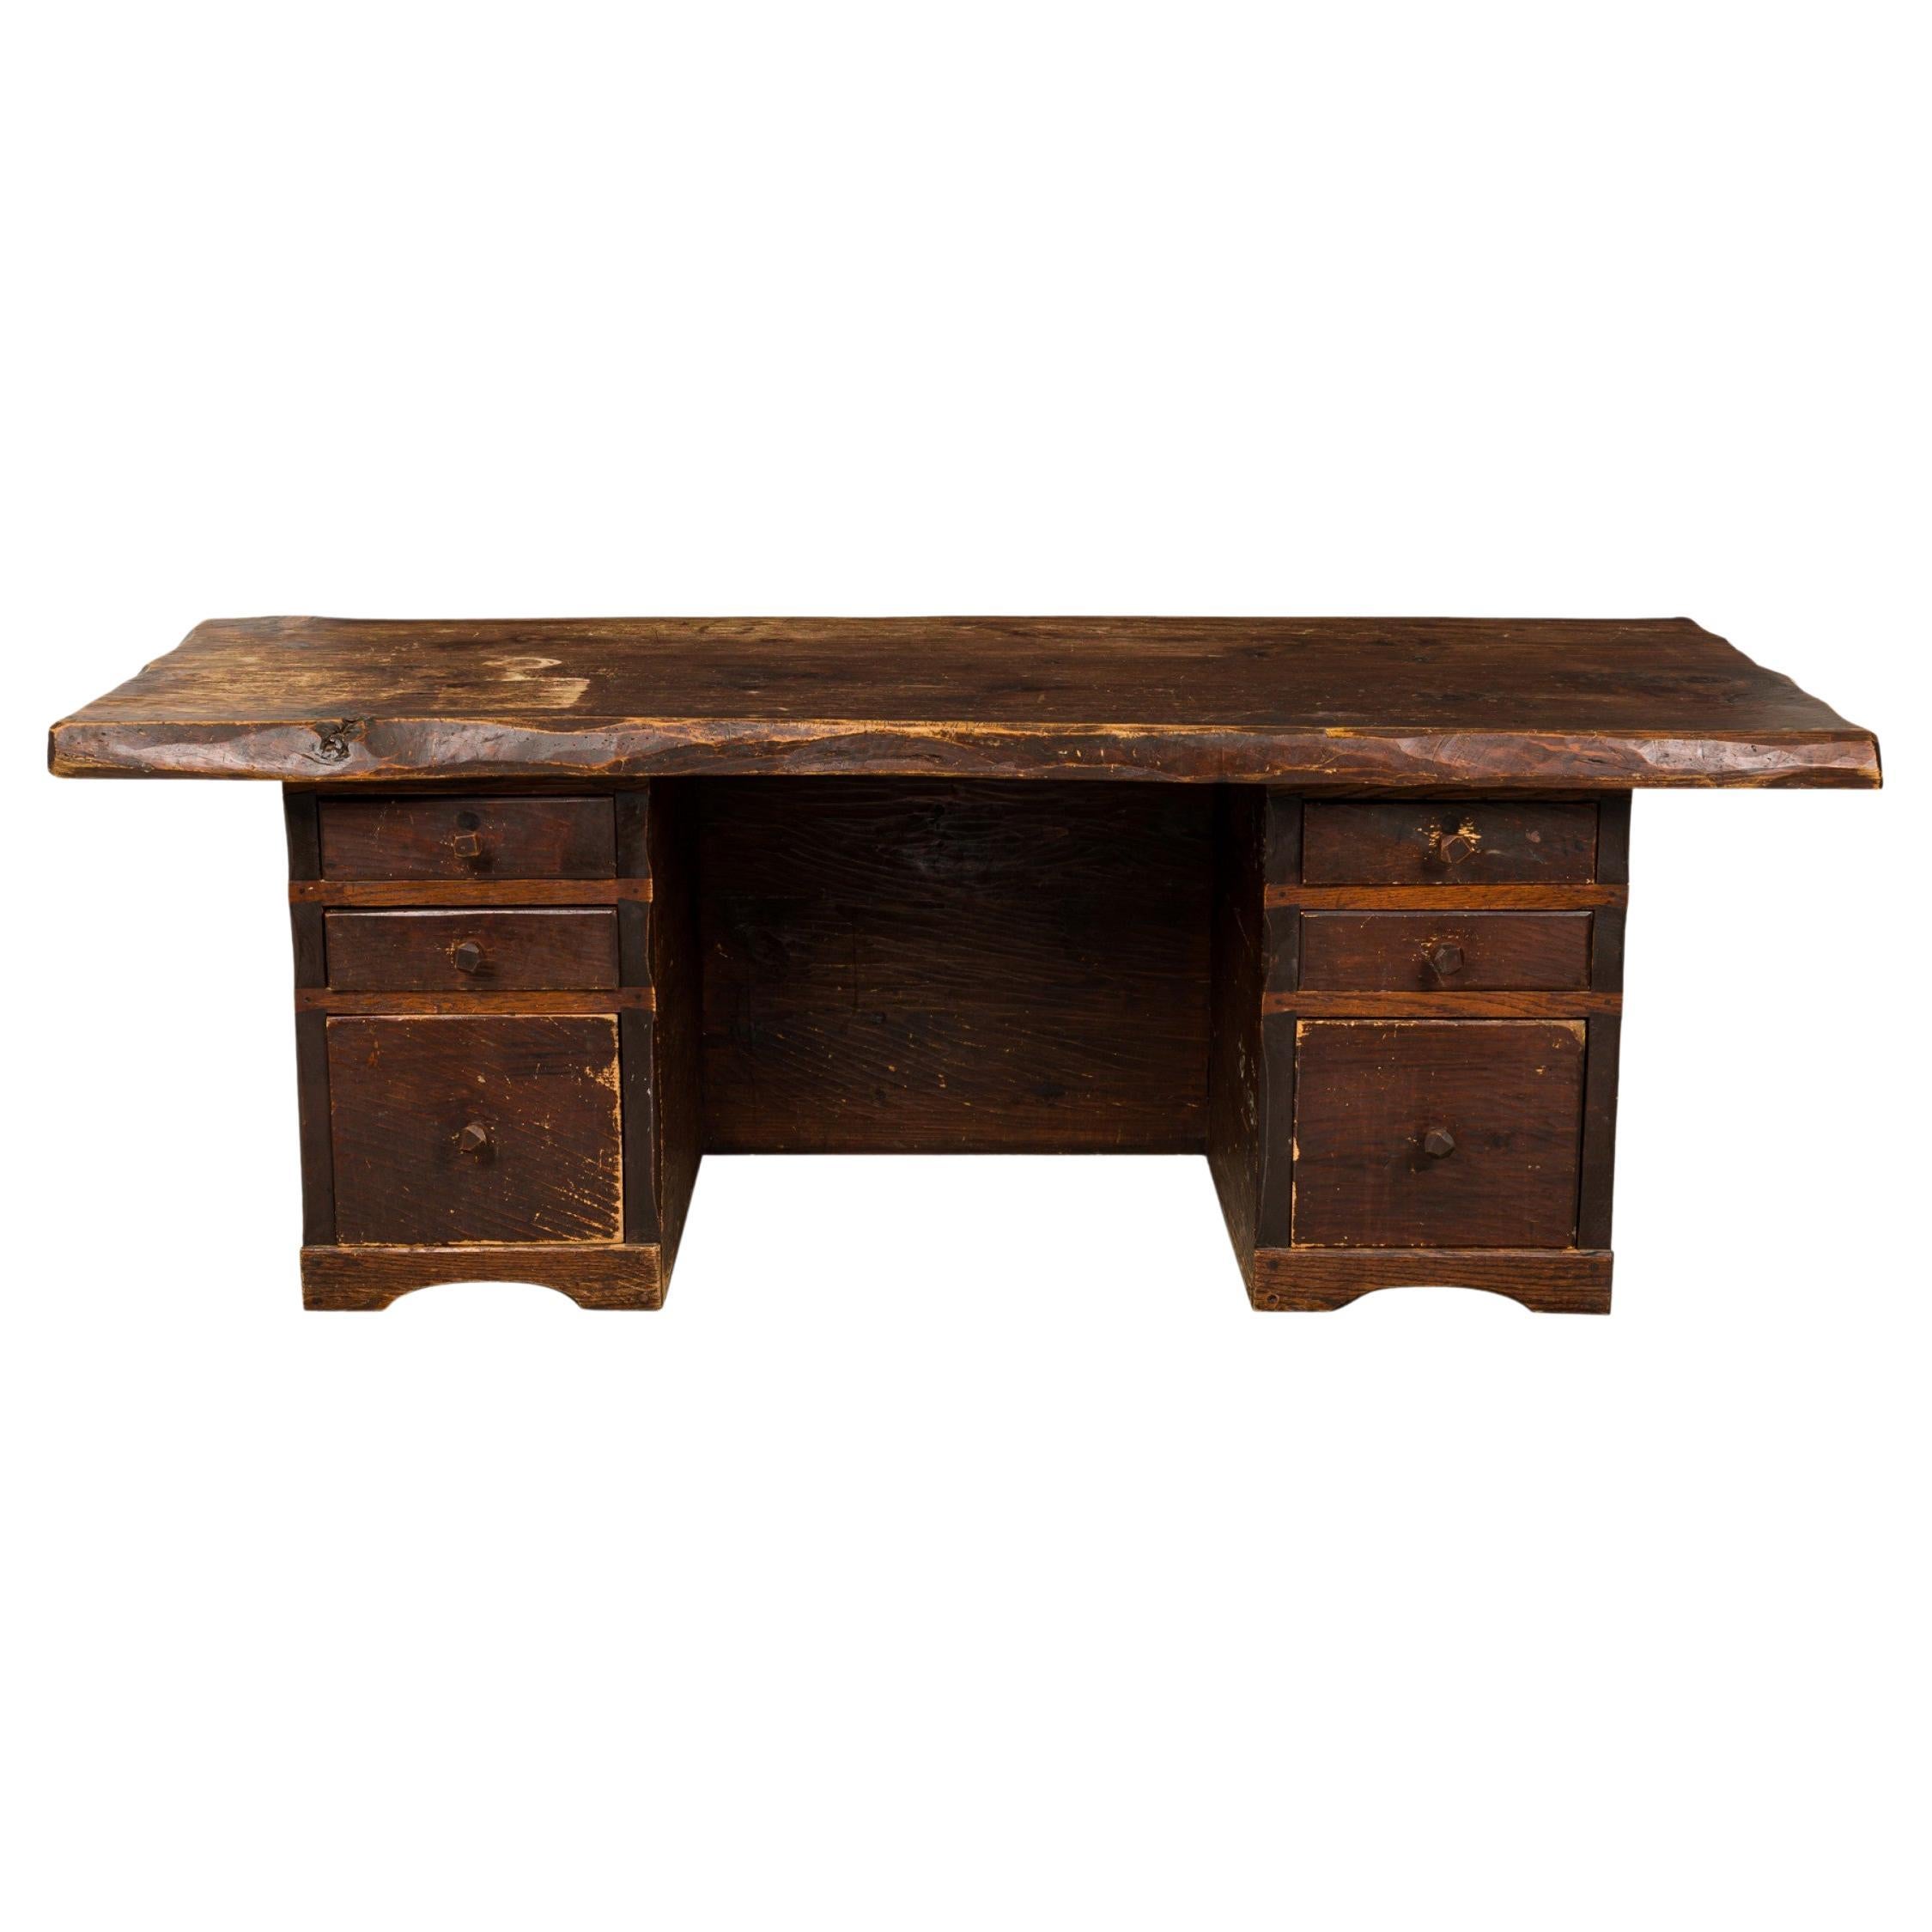 Rustic Adirondack Style Hewn Dark Stained Wooden Kneehole Desk For Sale